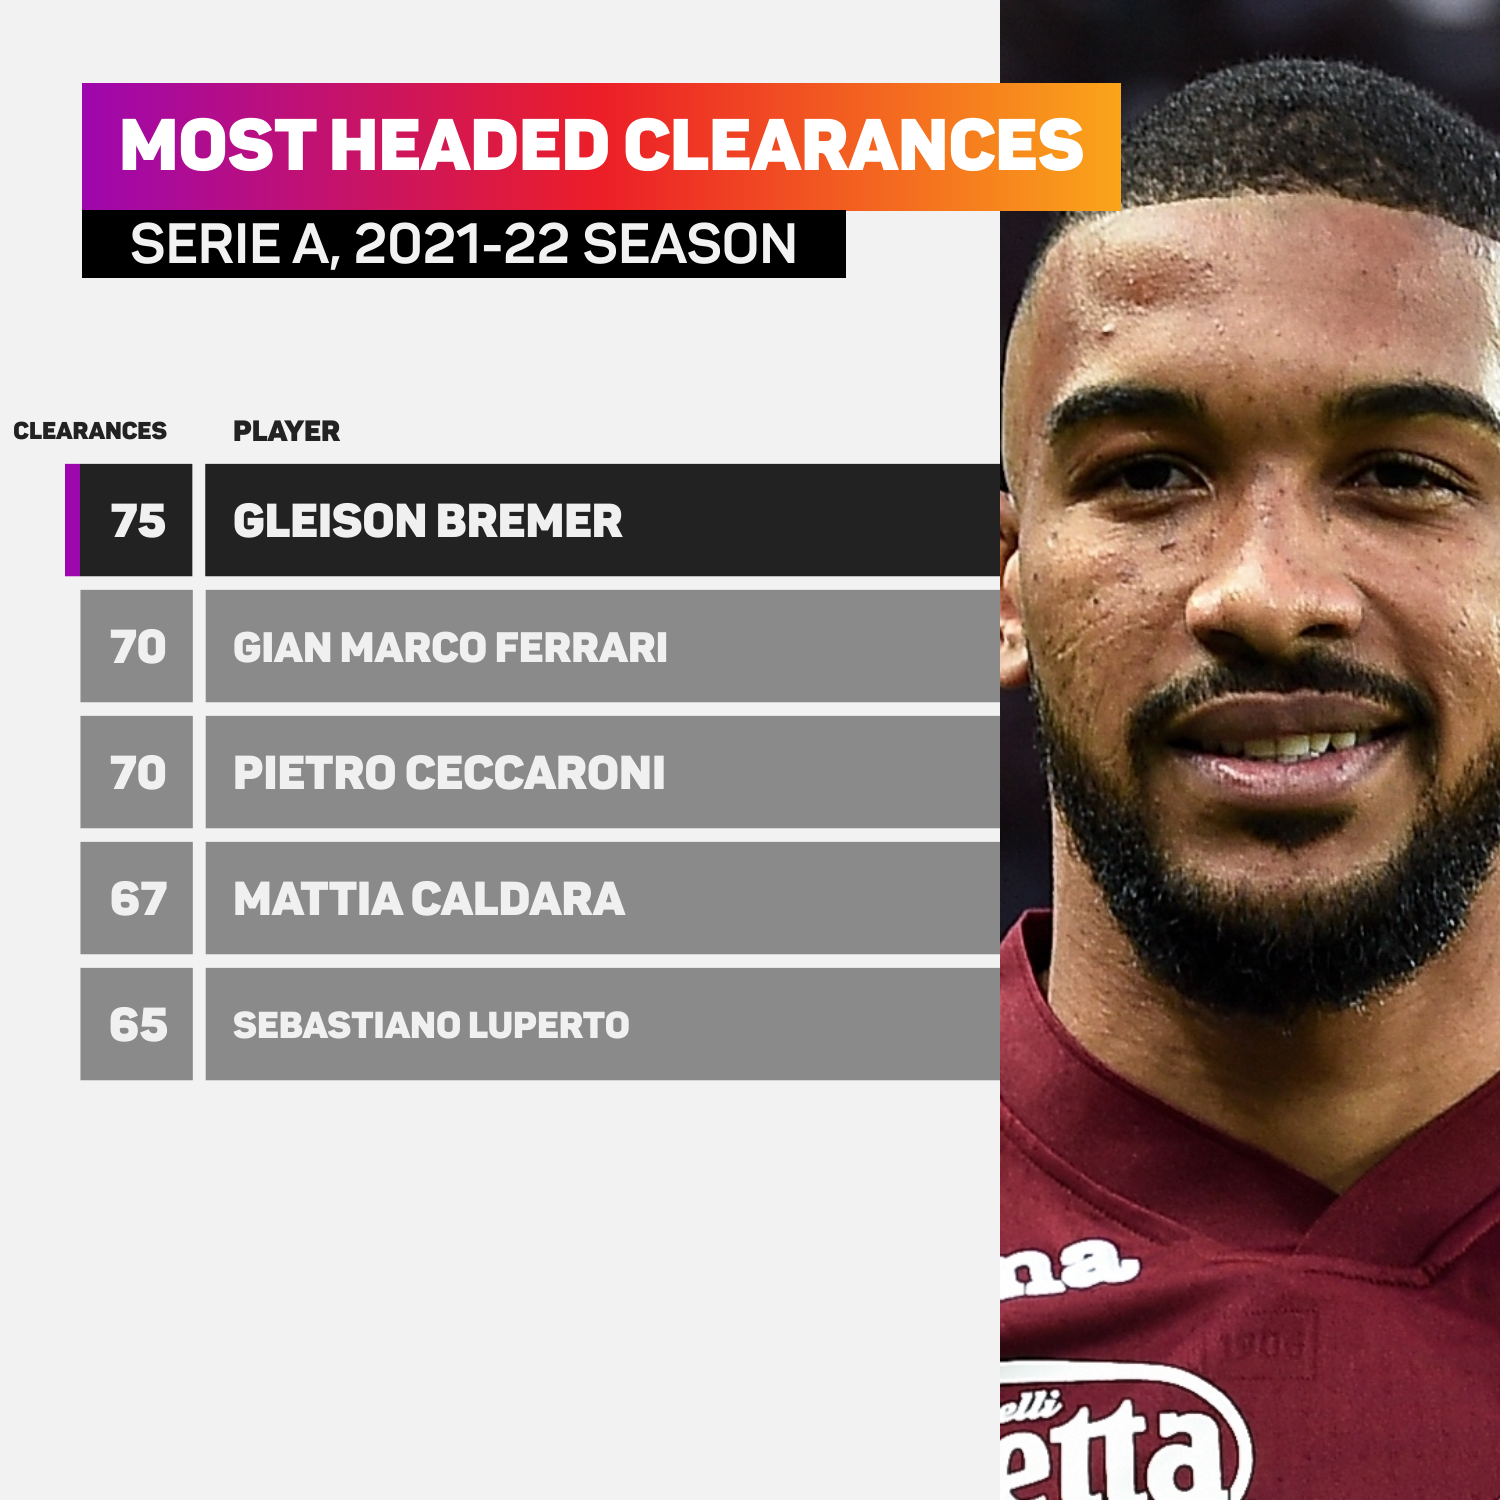 Bremer led the way for headed clearances in Serie A last season